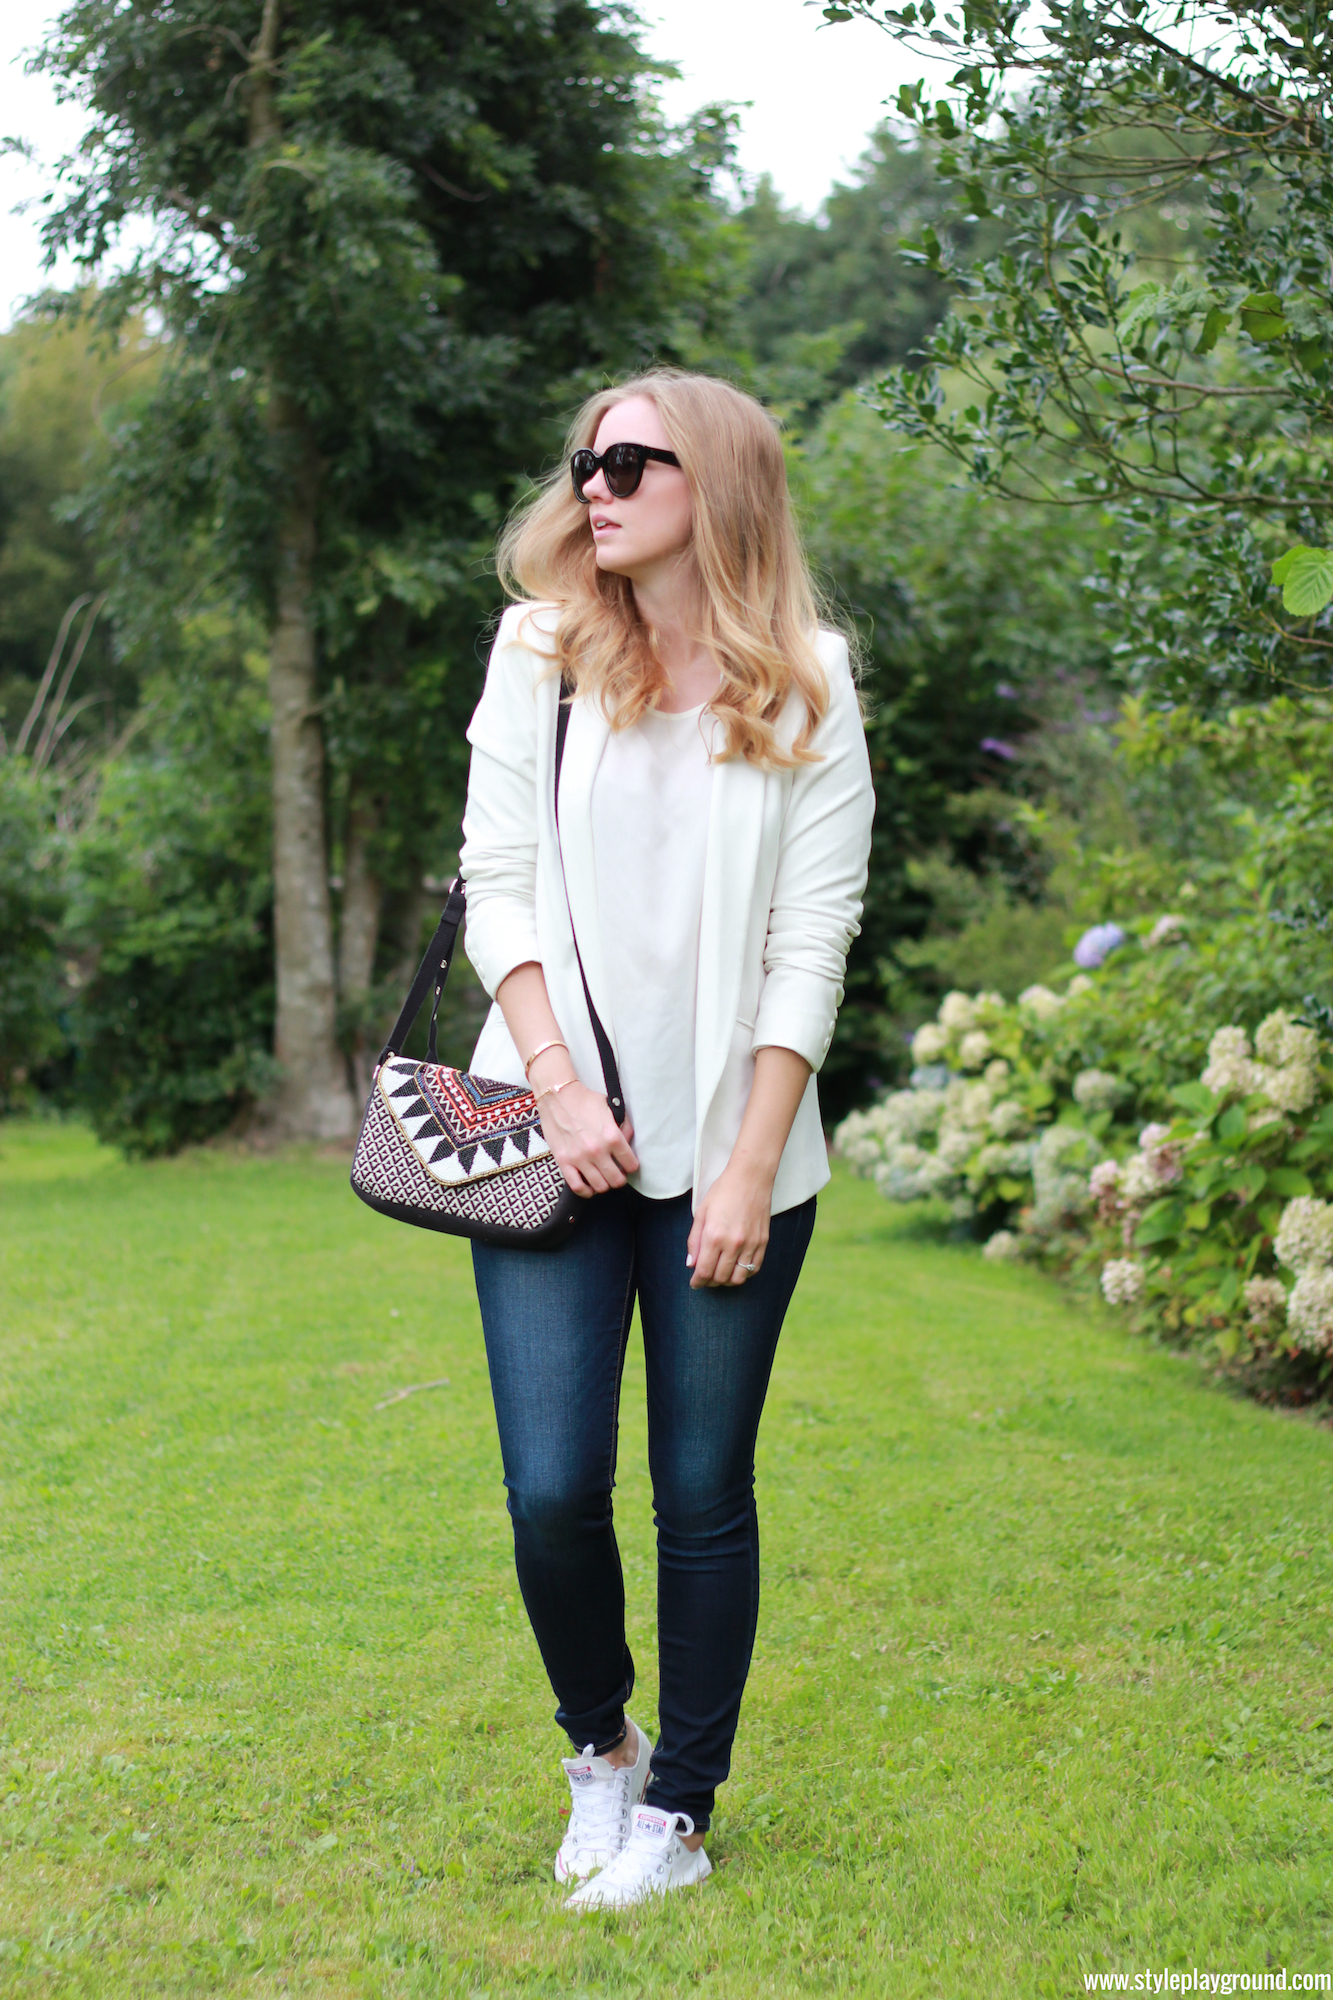 Axelle Blanpain of Style playground is wearing an Asos blazer, Mango top, American Eagle jeggings, white Converse, Celine Audrey sunglasses, S Oliver bag, Tiffany & Co T bracelet & Cartier love bracelet